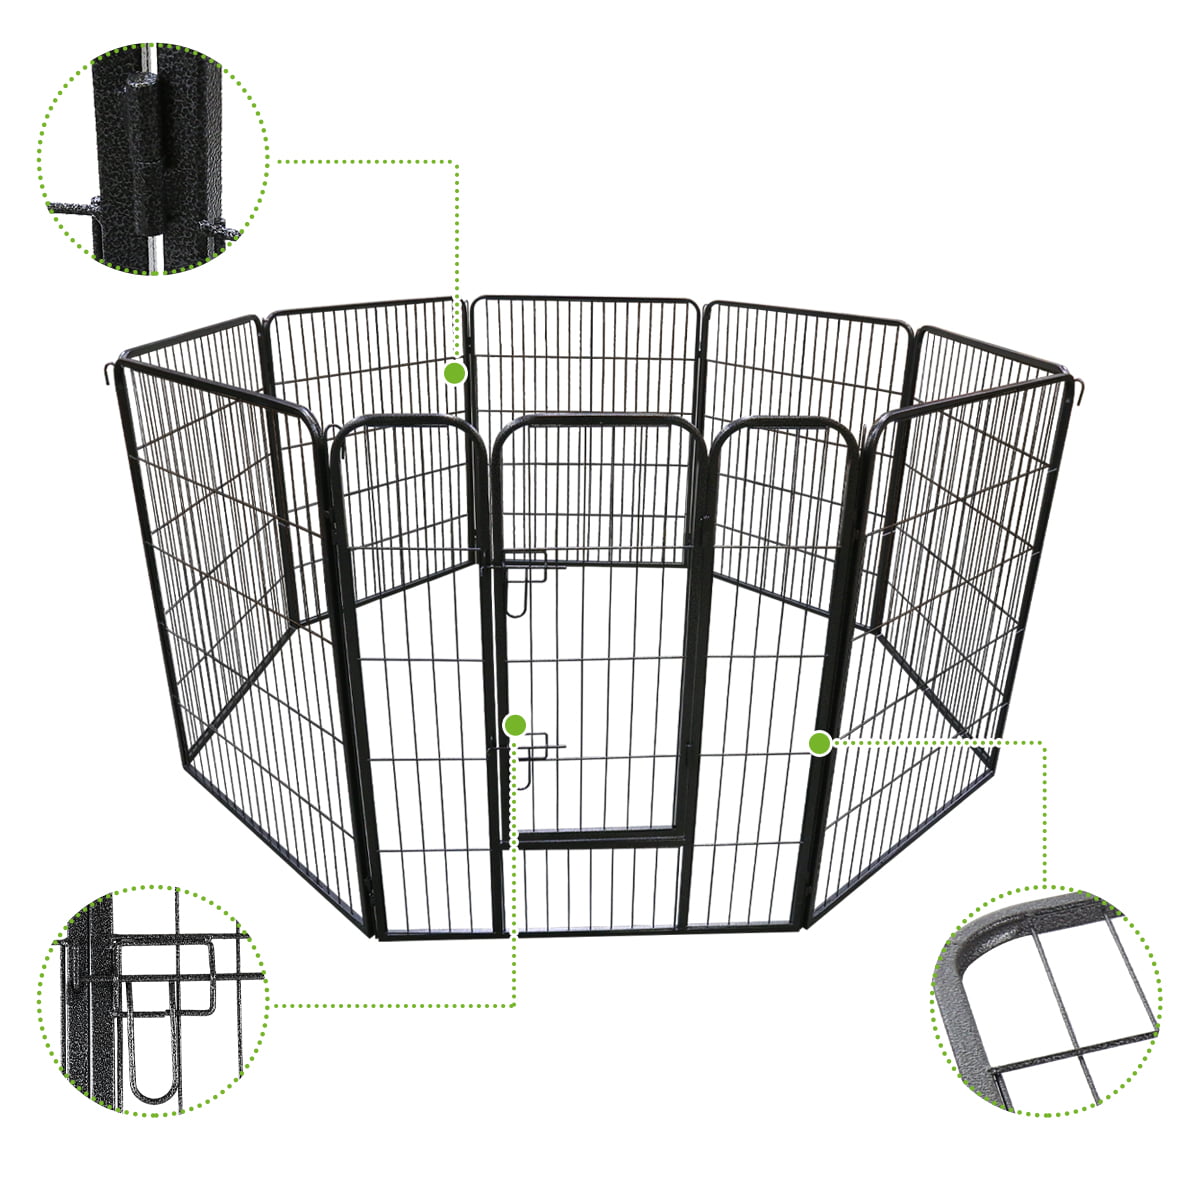 Geniqua 40 Inch 16 Panel Heavy Duty Metal Pet Dog Playpen Kennel Exercise Fence Cage